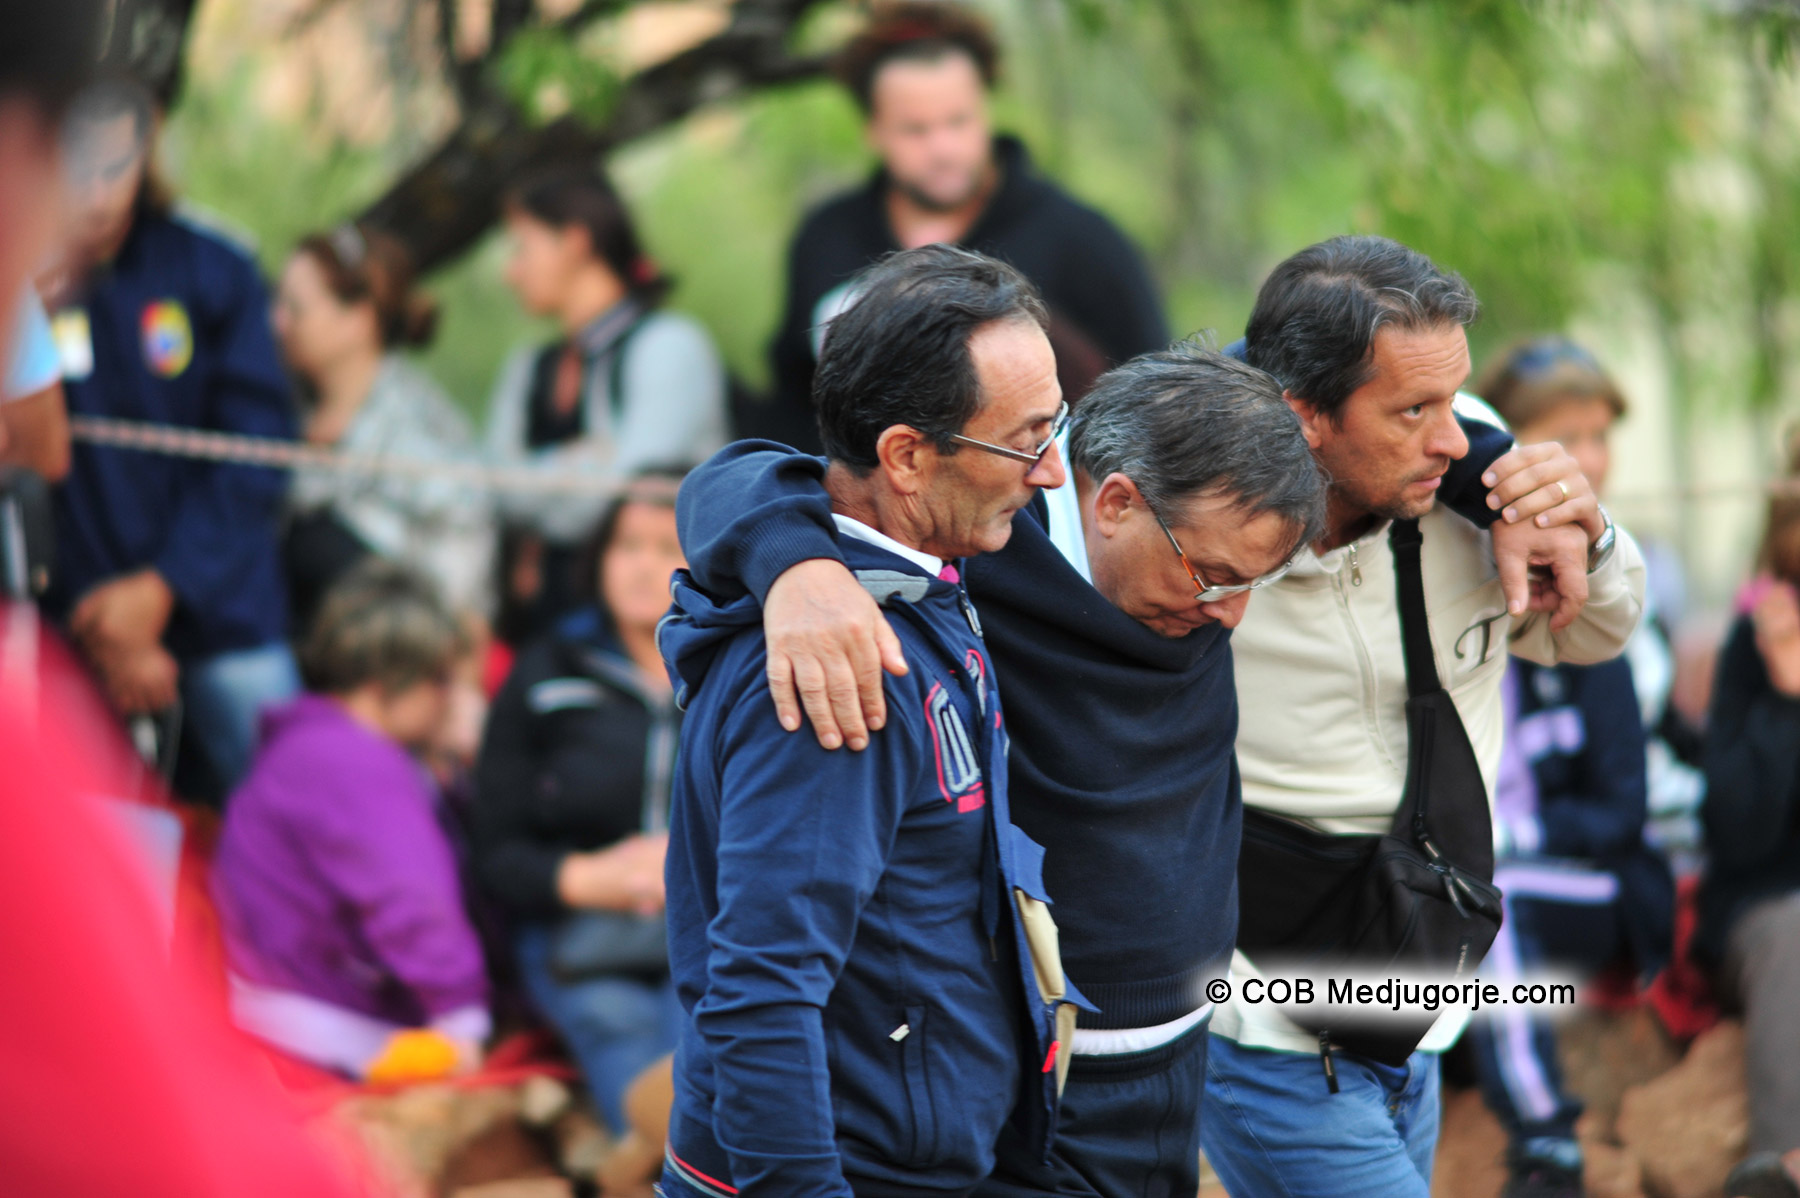 two men carry a crippled man to apparition of Our Lady of Medjugorje